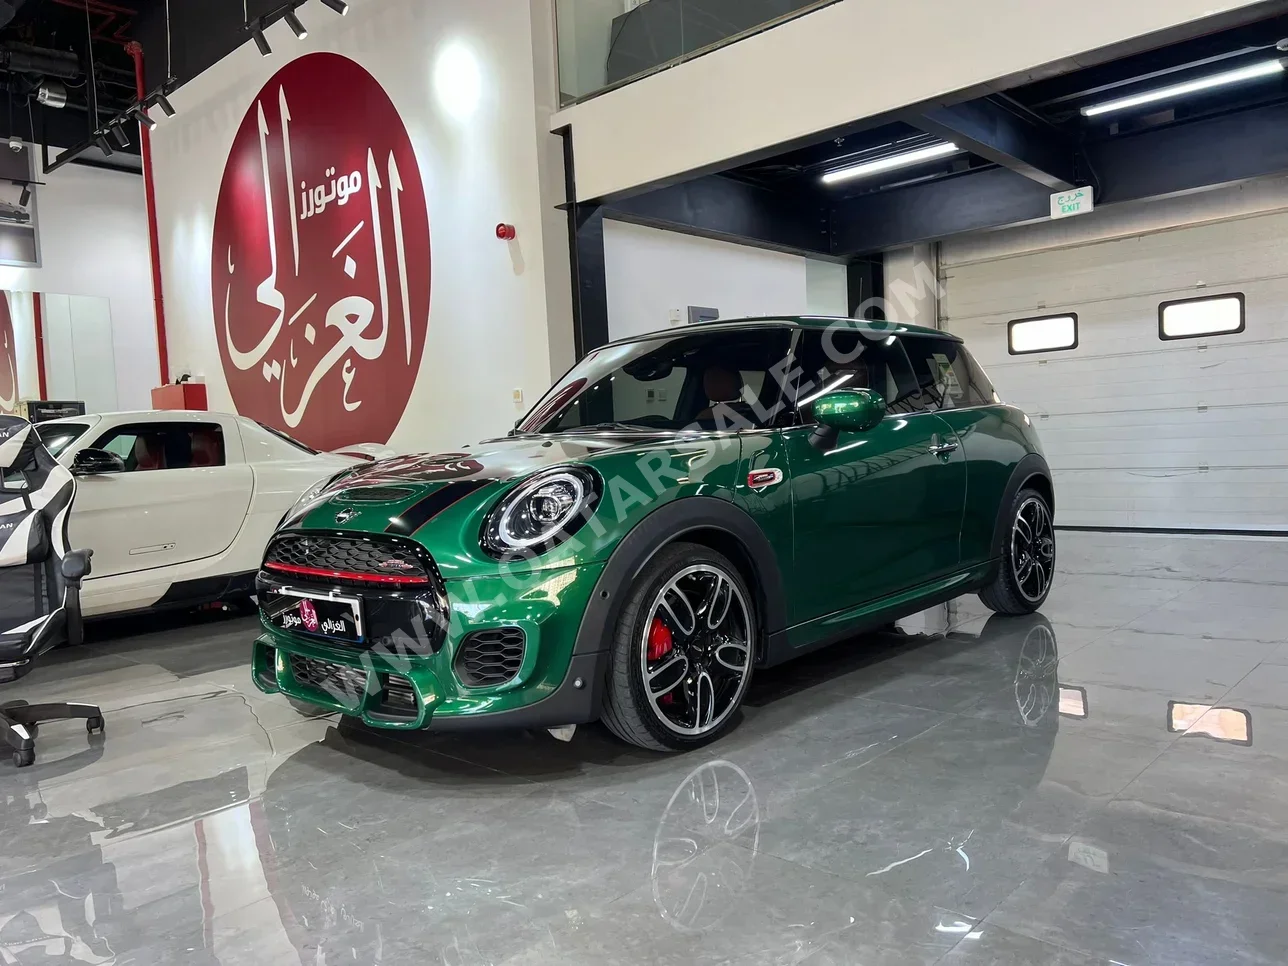 Mini  Cooper  JCW  2020  Automatic  25,000 Km  4 Cylinder  Front Wheel Drive (FWD)  Hatchback  Green  With Warranty